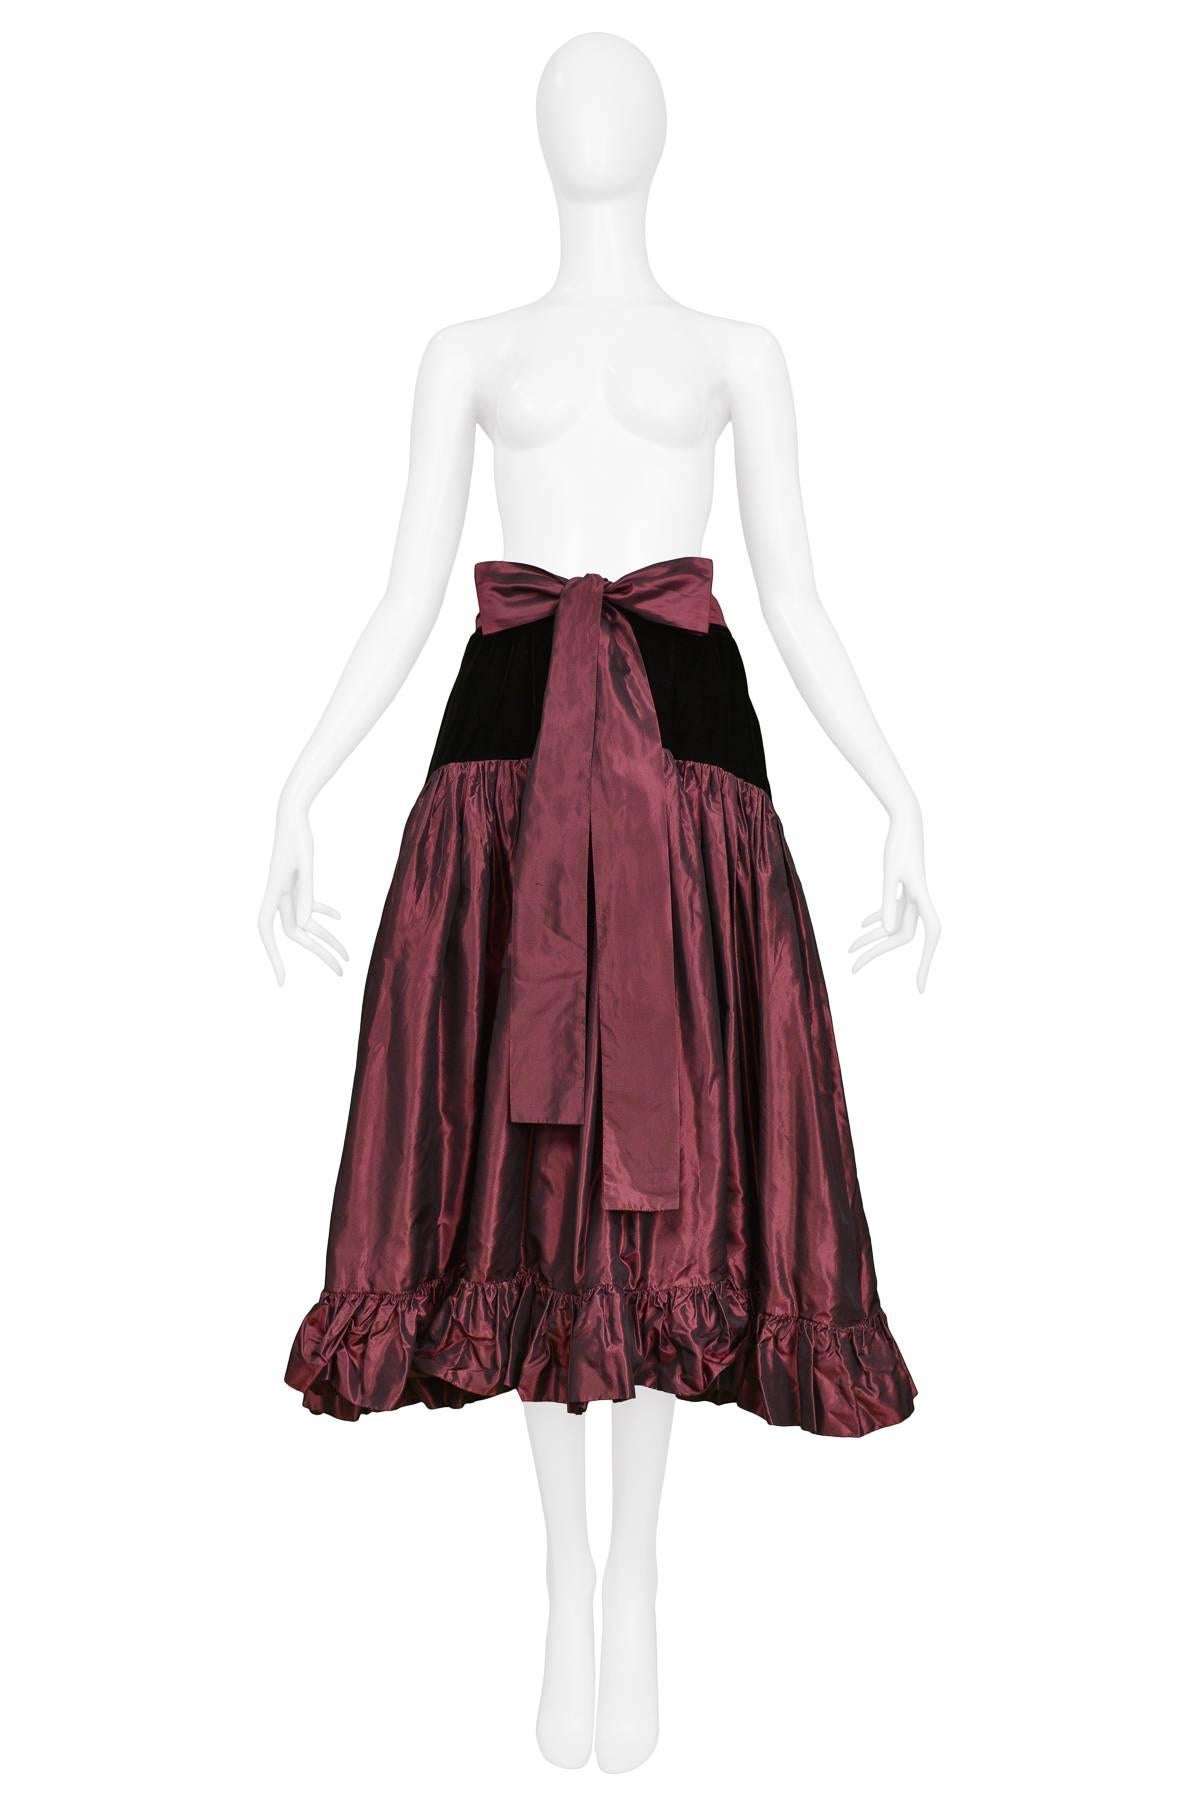 Resurrection Vintage is excited to offer a vintage Yves Saint Laurent magenta silk taffeta and black velvet party skirt featuring a high waistband, bow belt, black velvet yoke, gathered taffeta skirt with ruffles at the hem, and invisible side